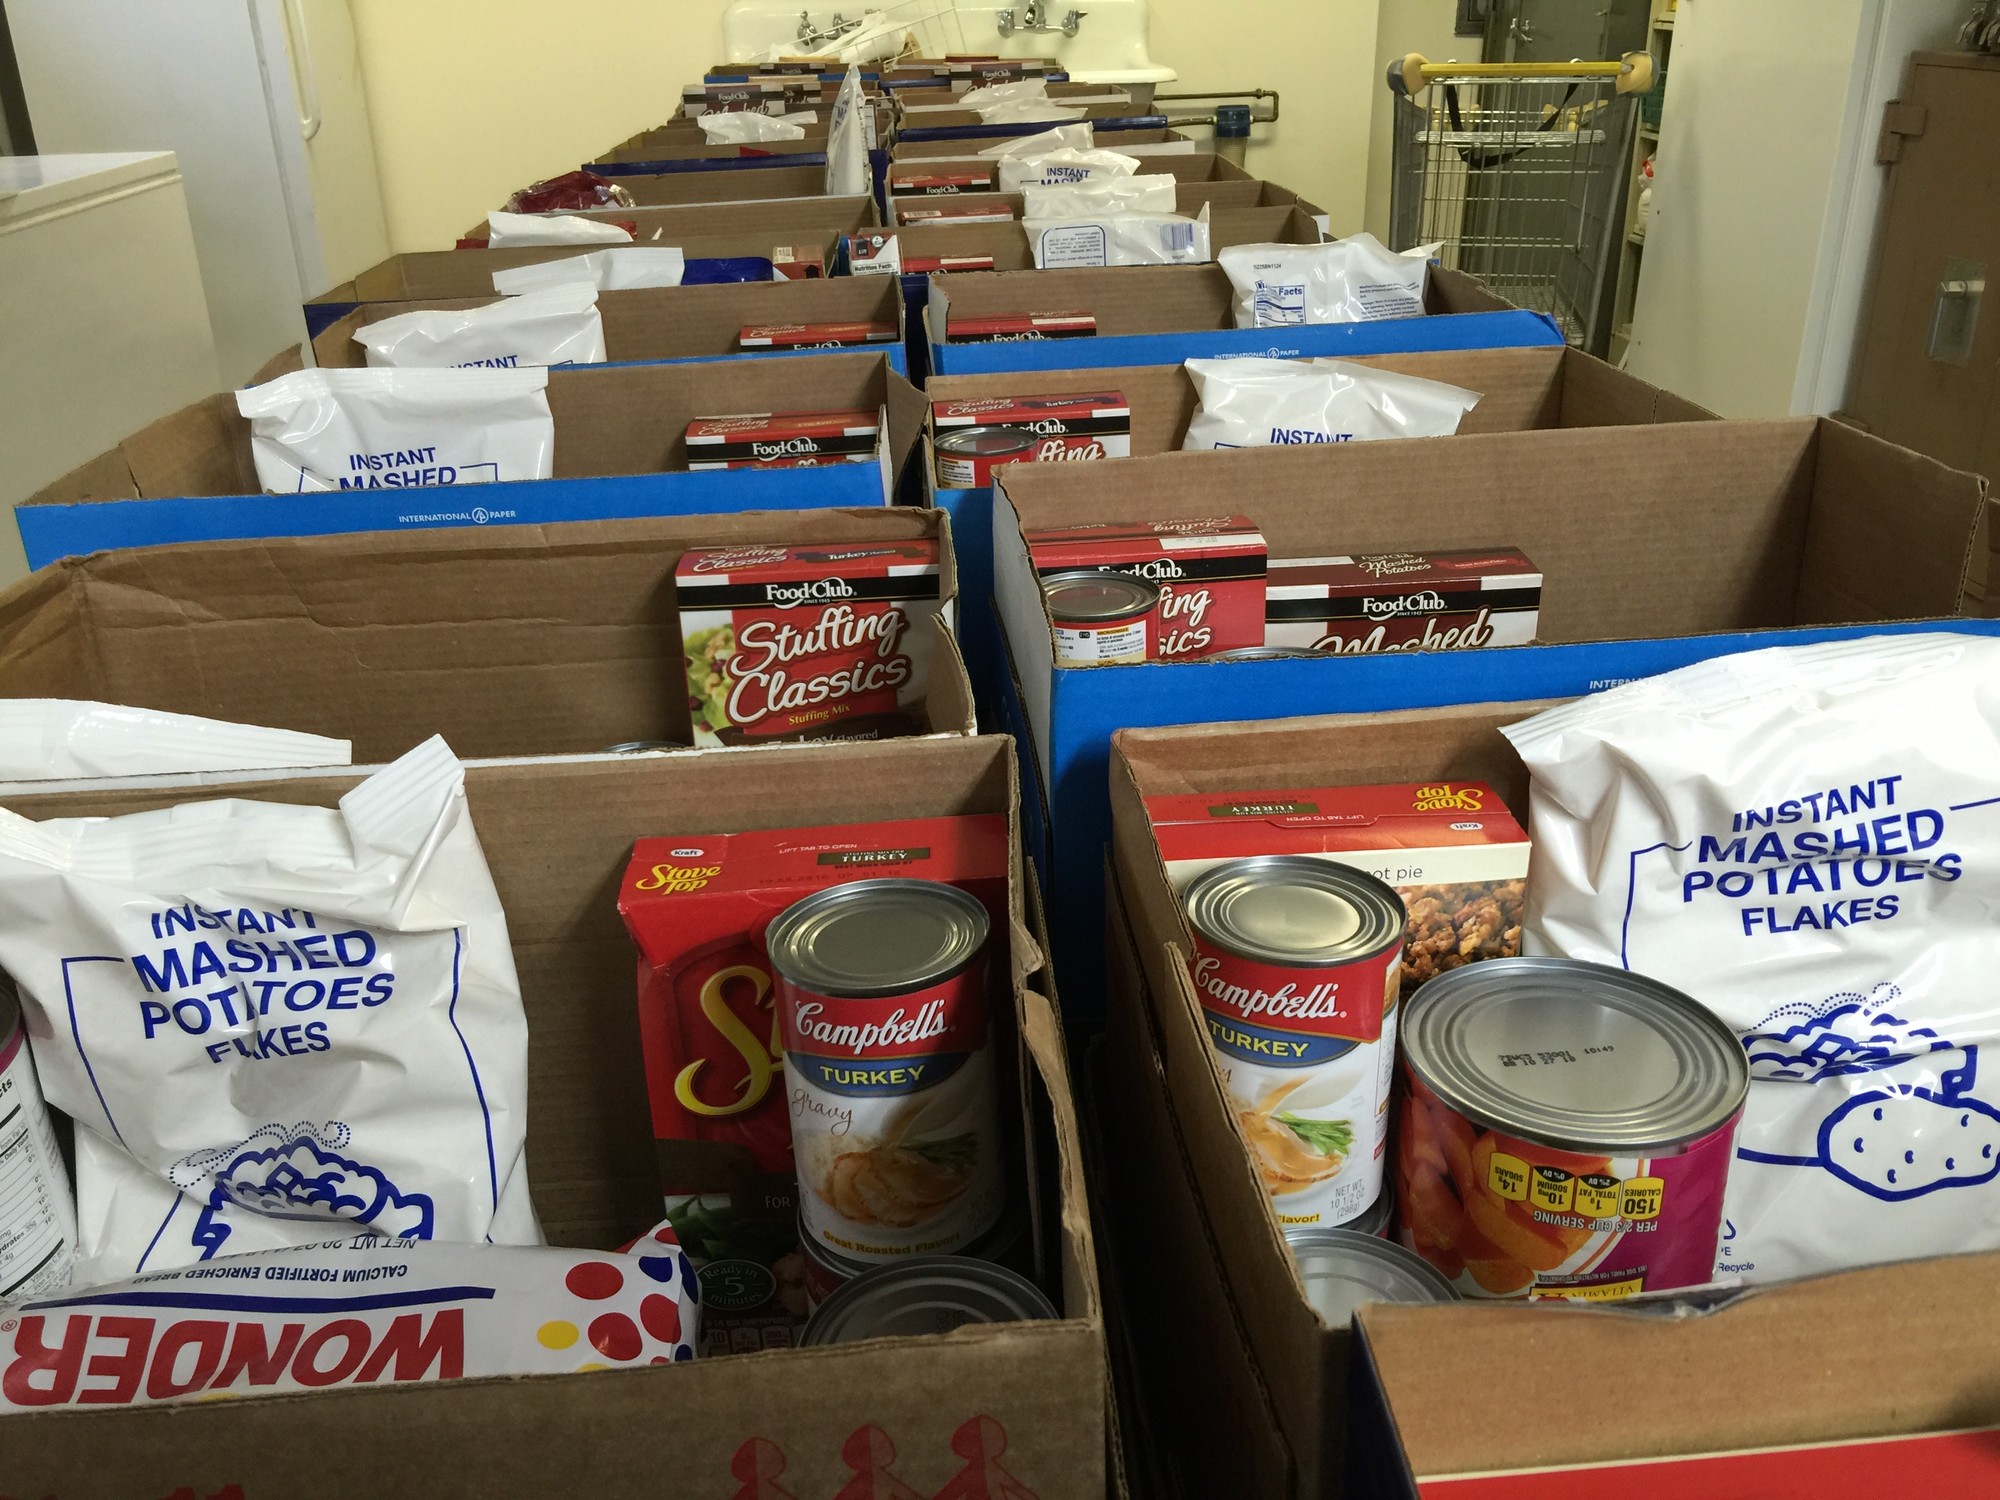 More than 120 boxes filled with thanksgiving items were delivered last Saturday.